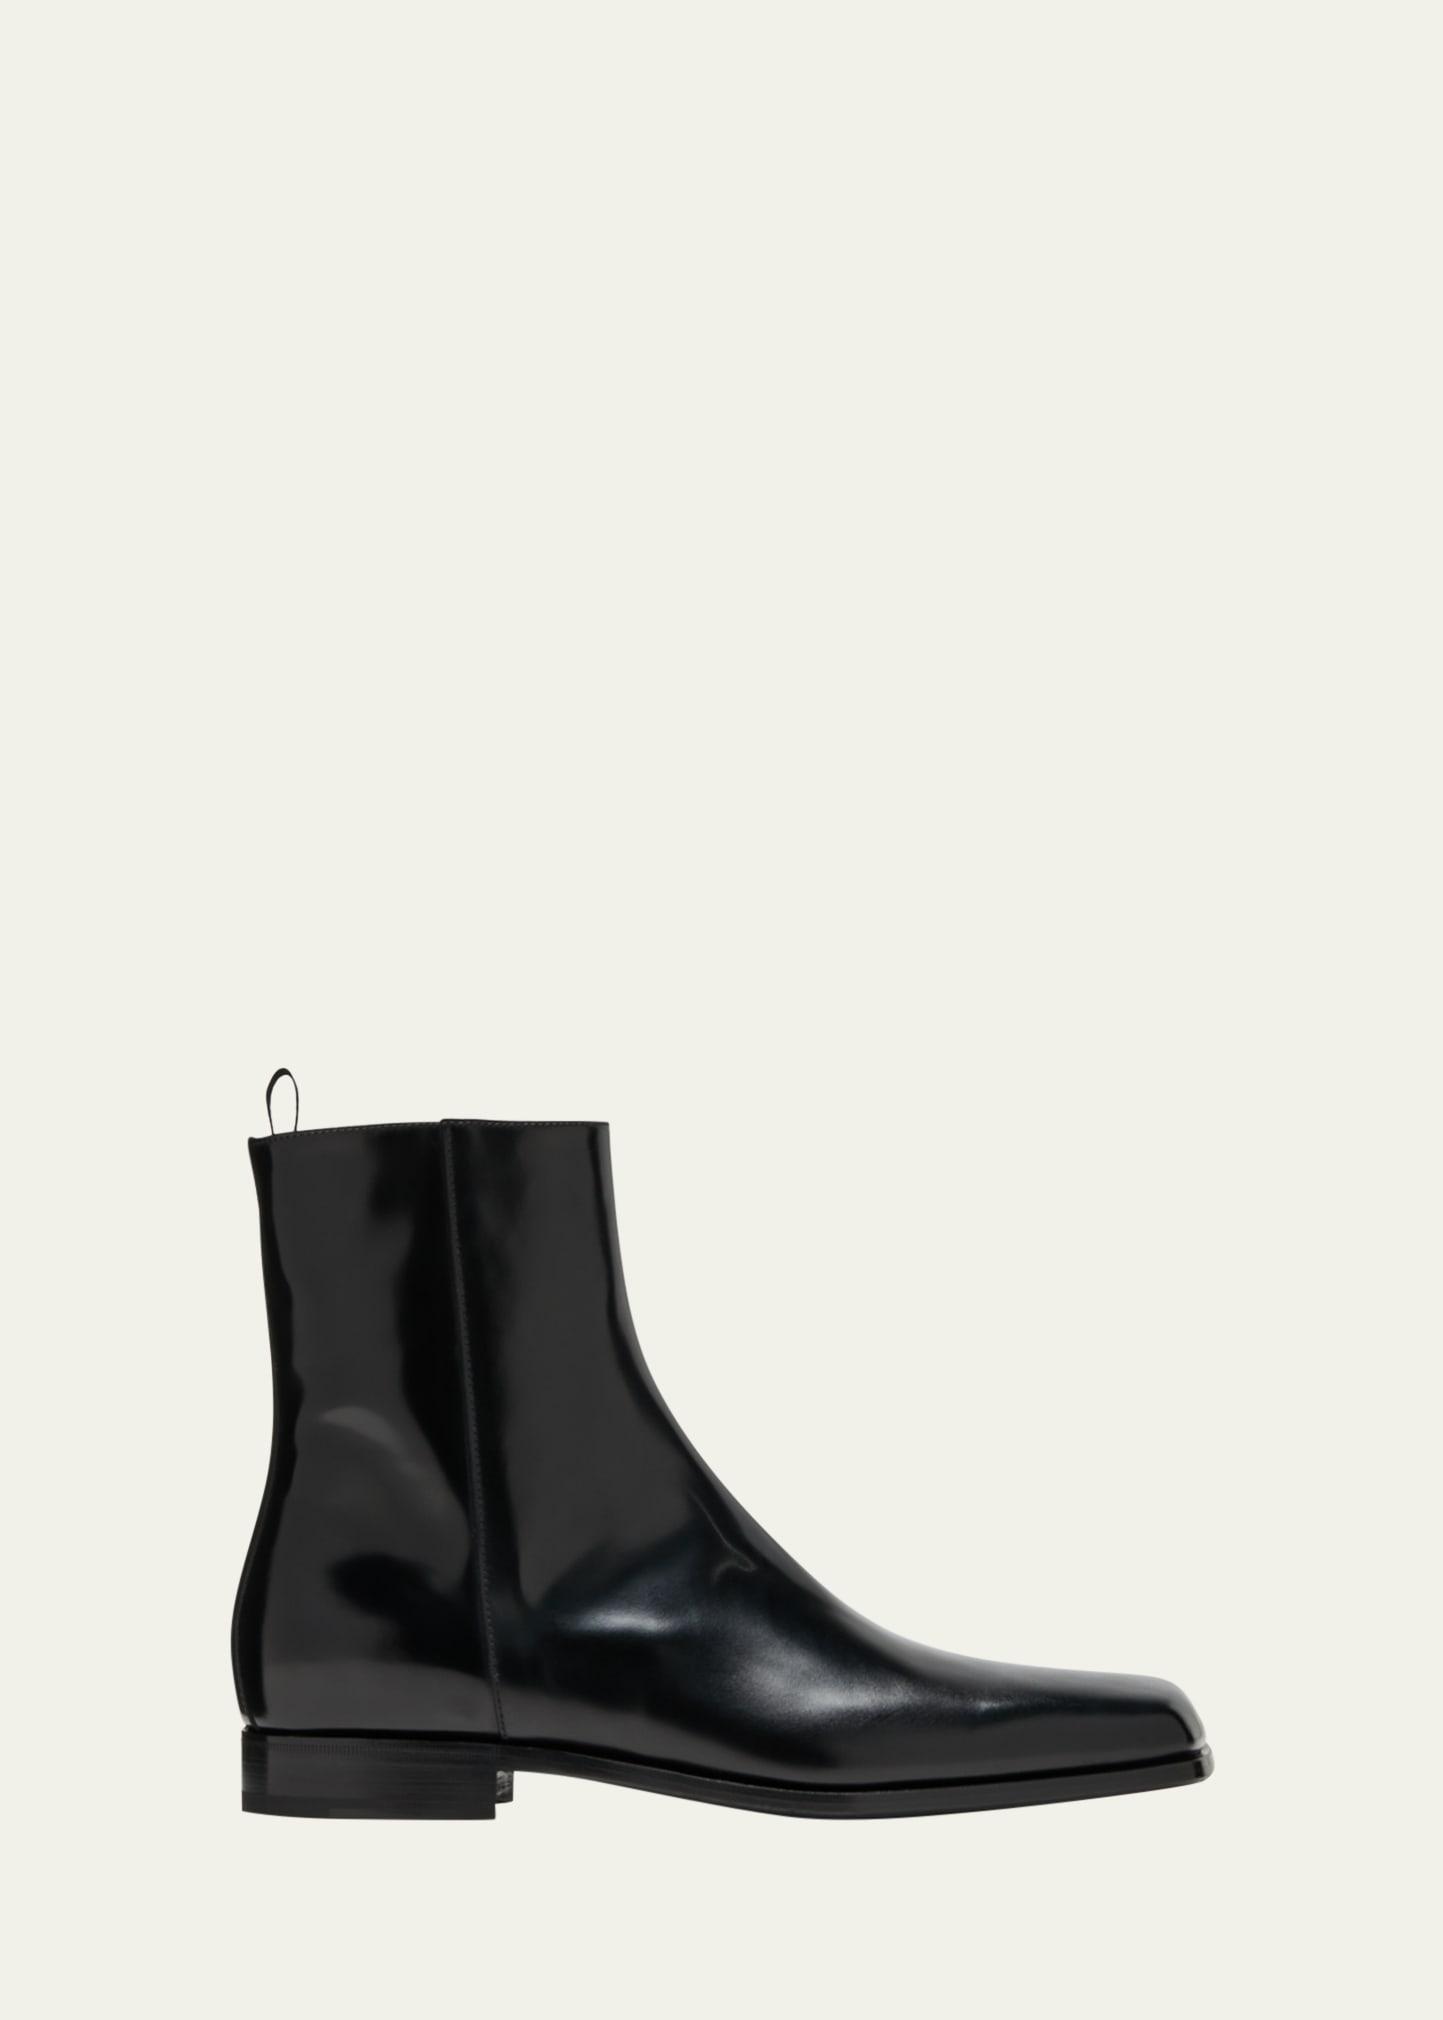 Mens Jokoto Leather Zip Ankle Boots Product Image